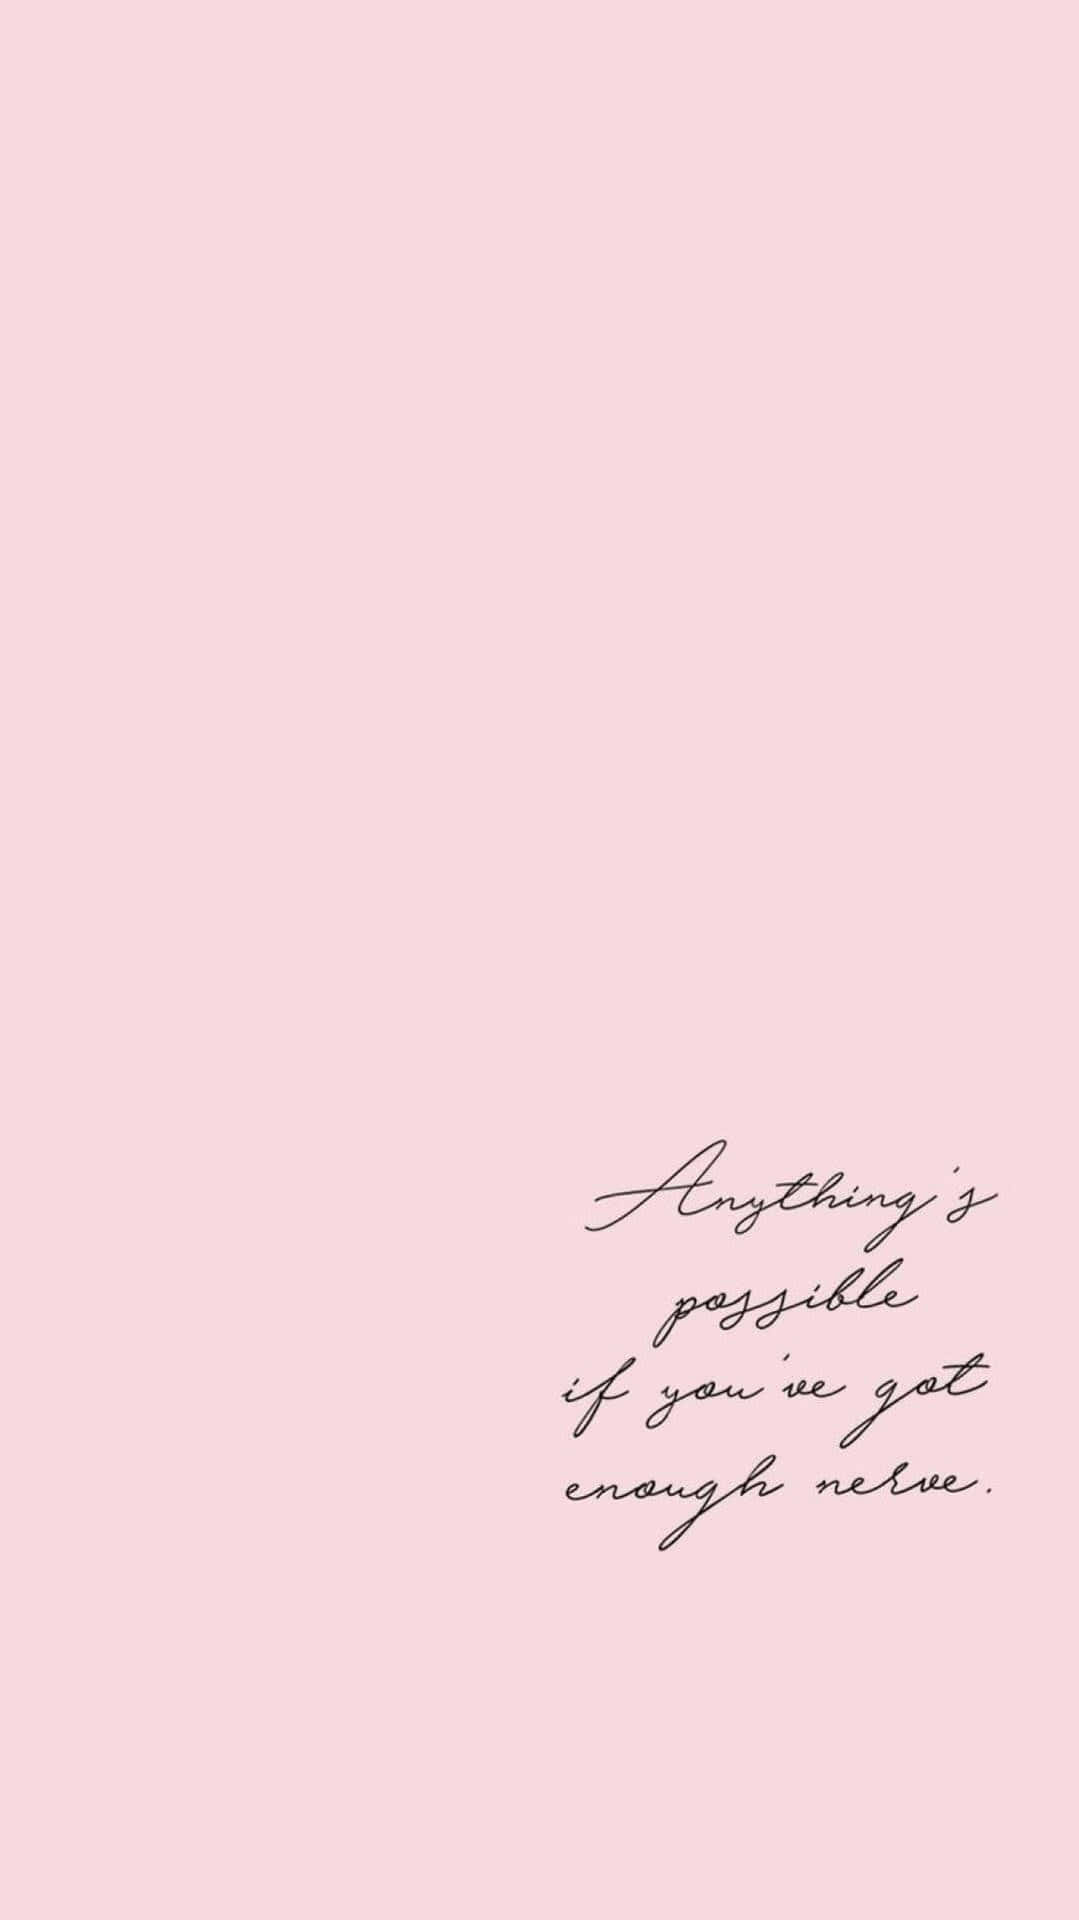 100+] Cute Aesthetic Quotes Wallpapers | Wallpapers.com